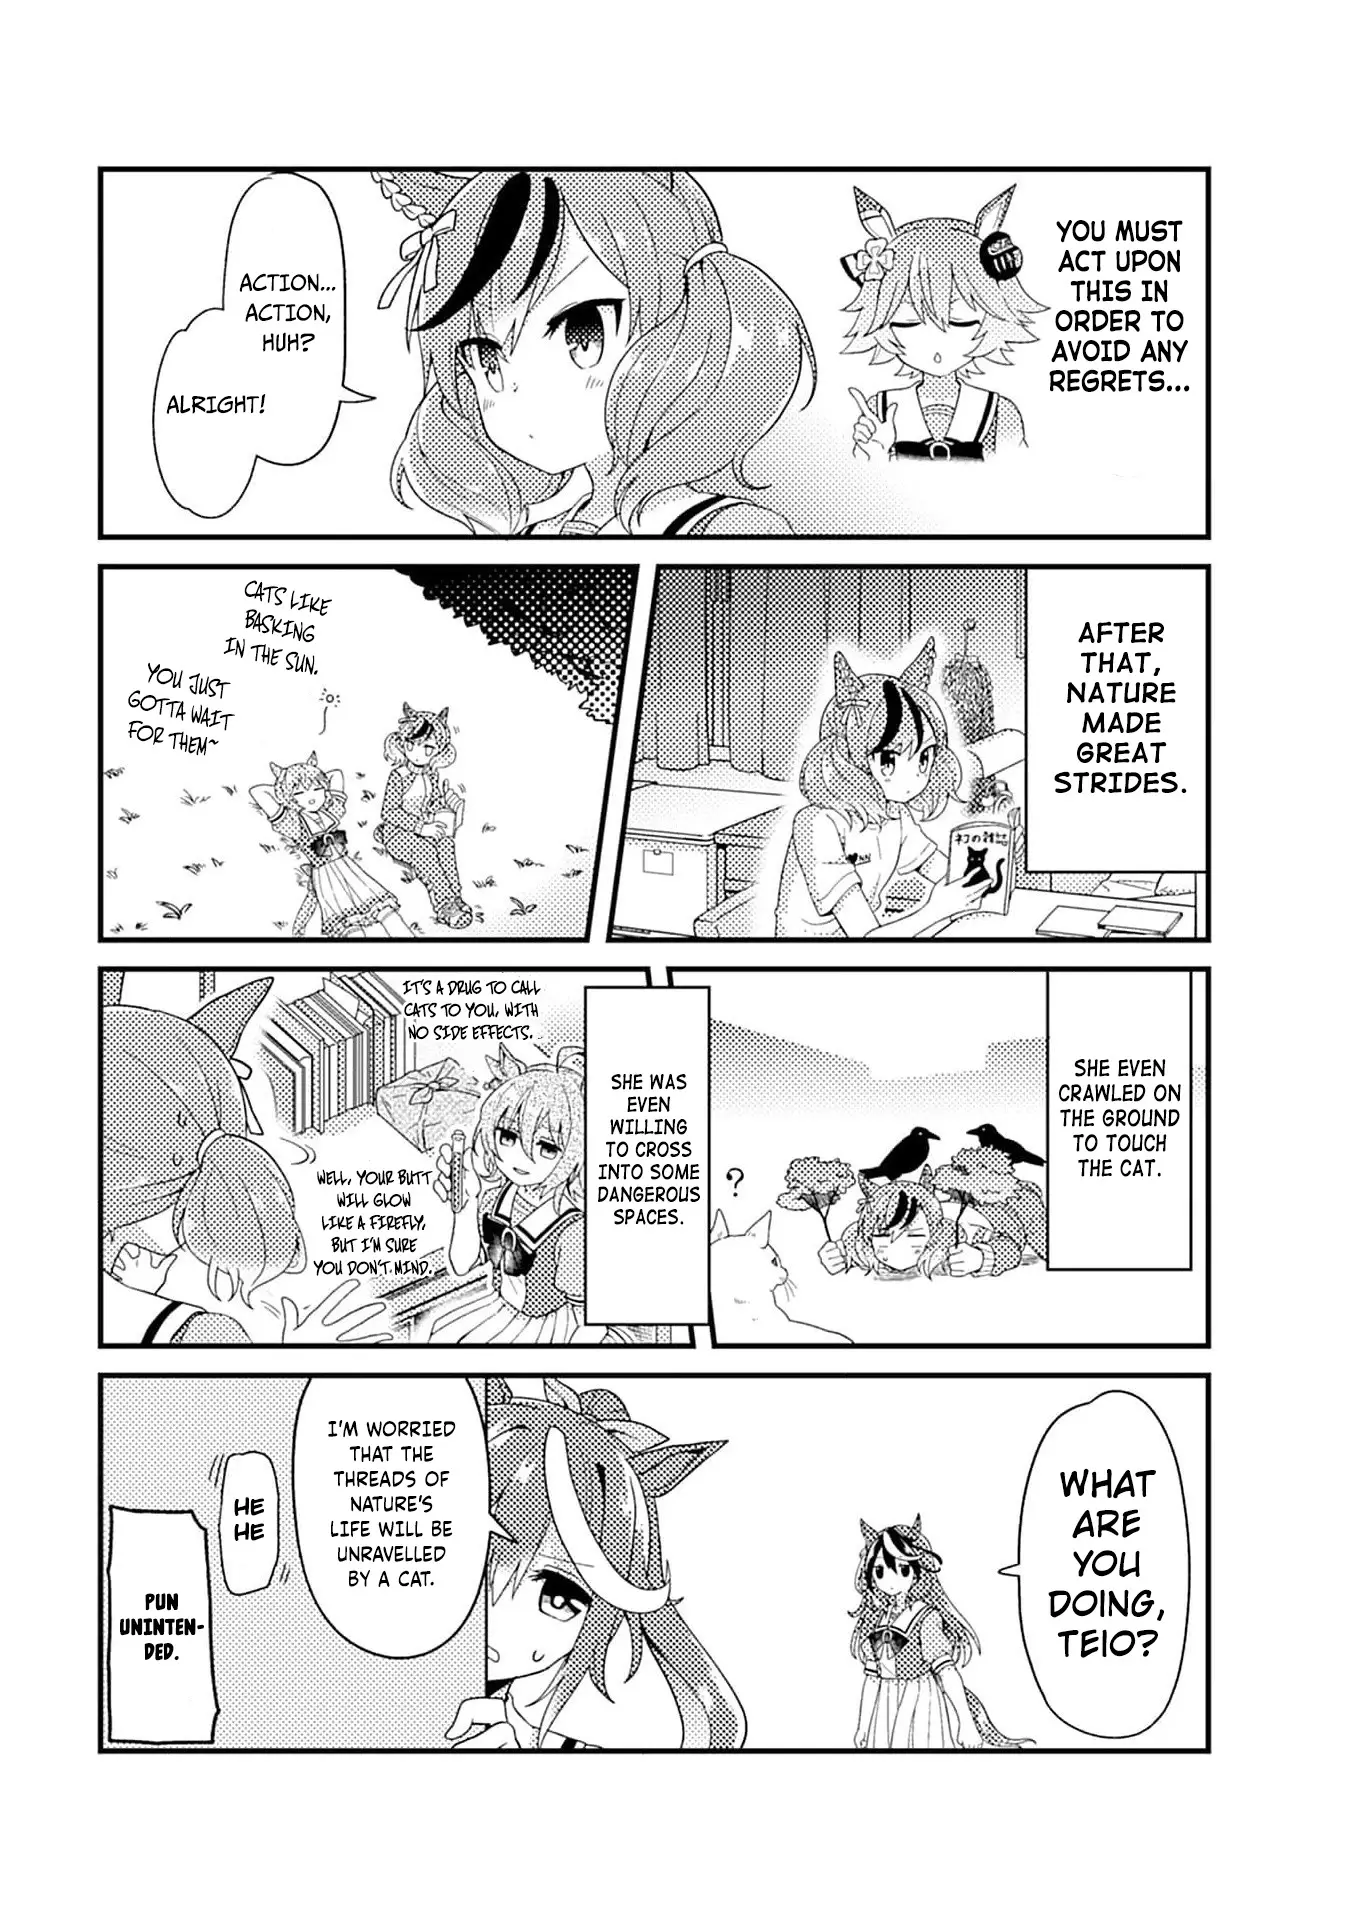 Uma Musume Pretty Derby Anthology Comic Star - 9 page 5-4c6cea9f